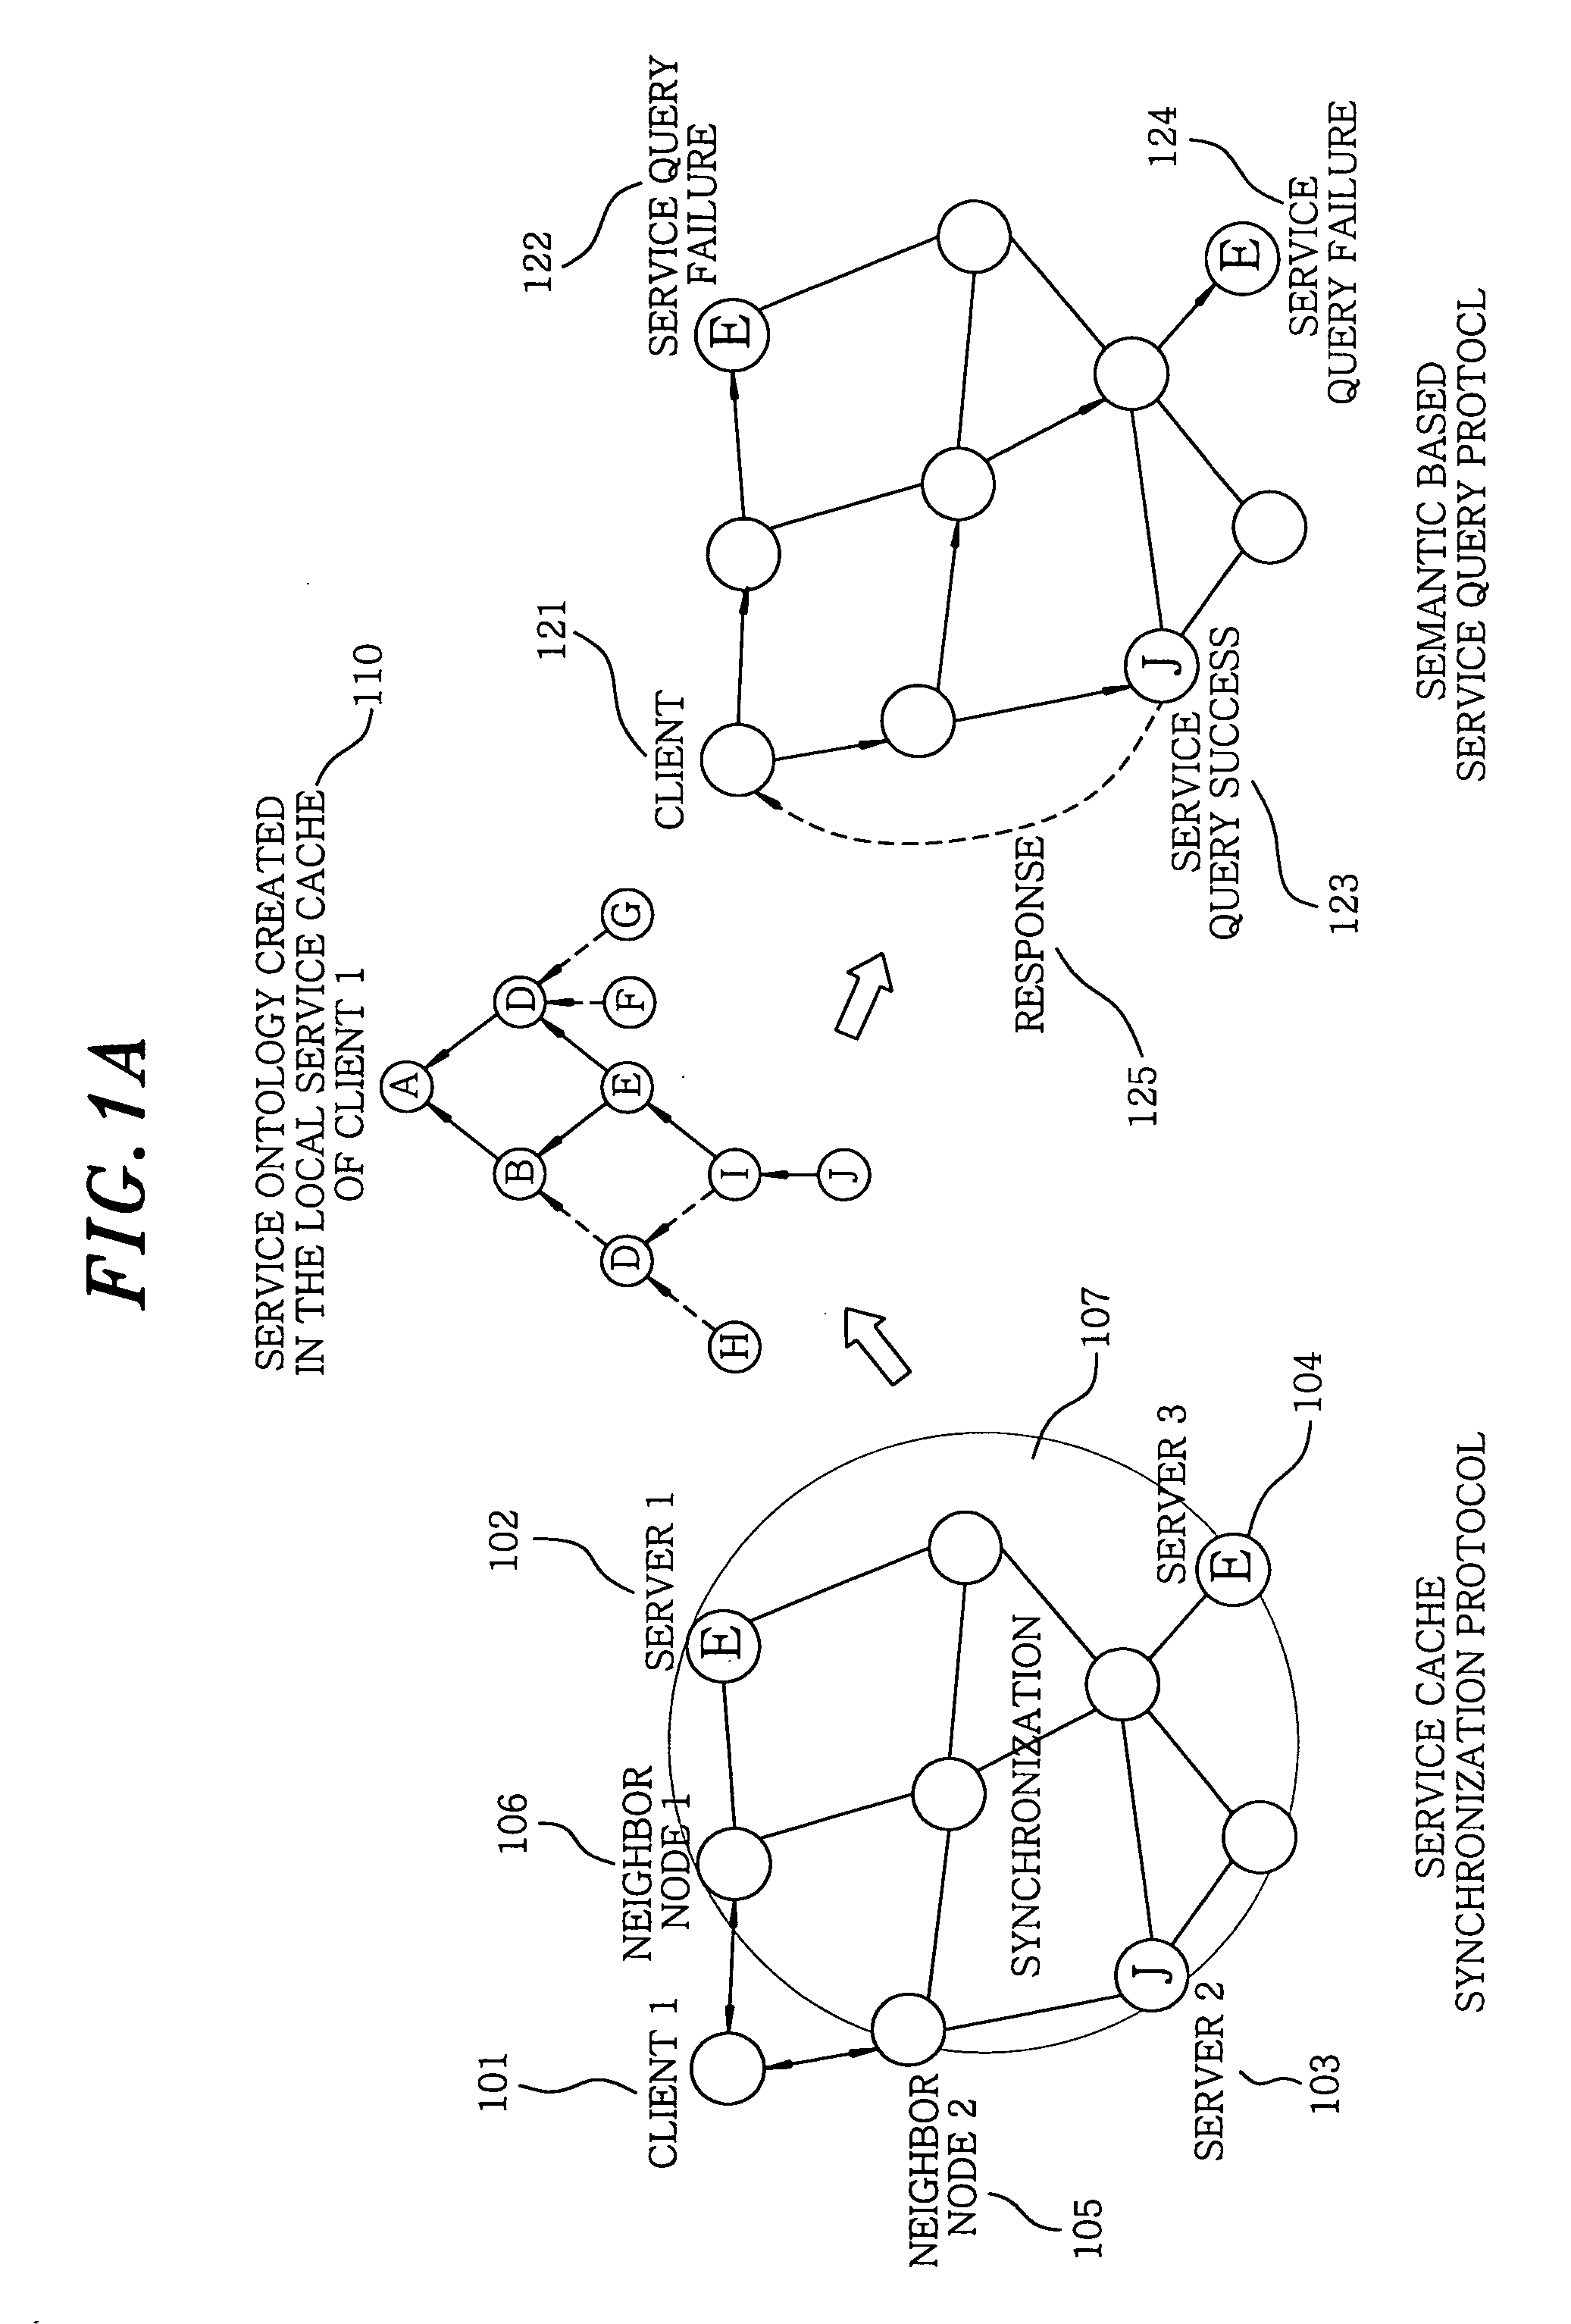 Ontology-based service discovery system and method for ad hoc networks